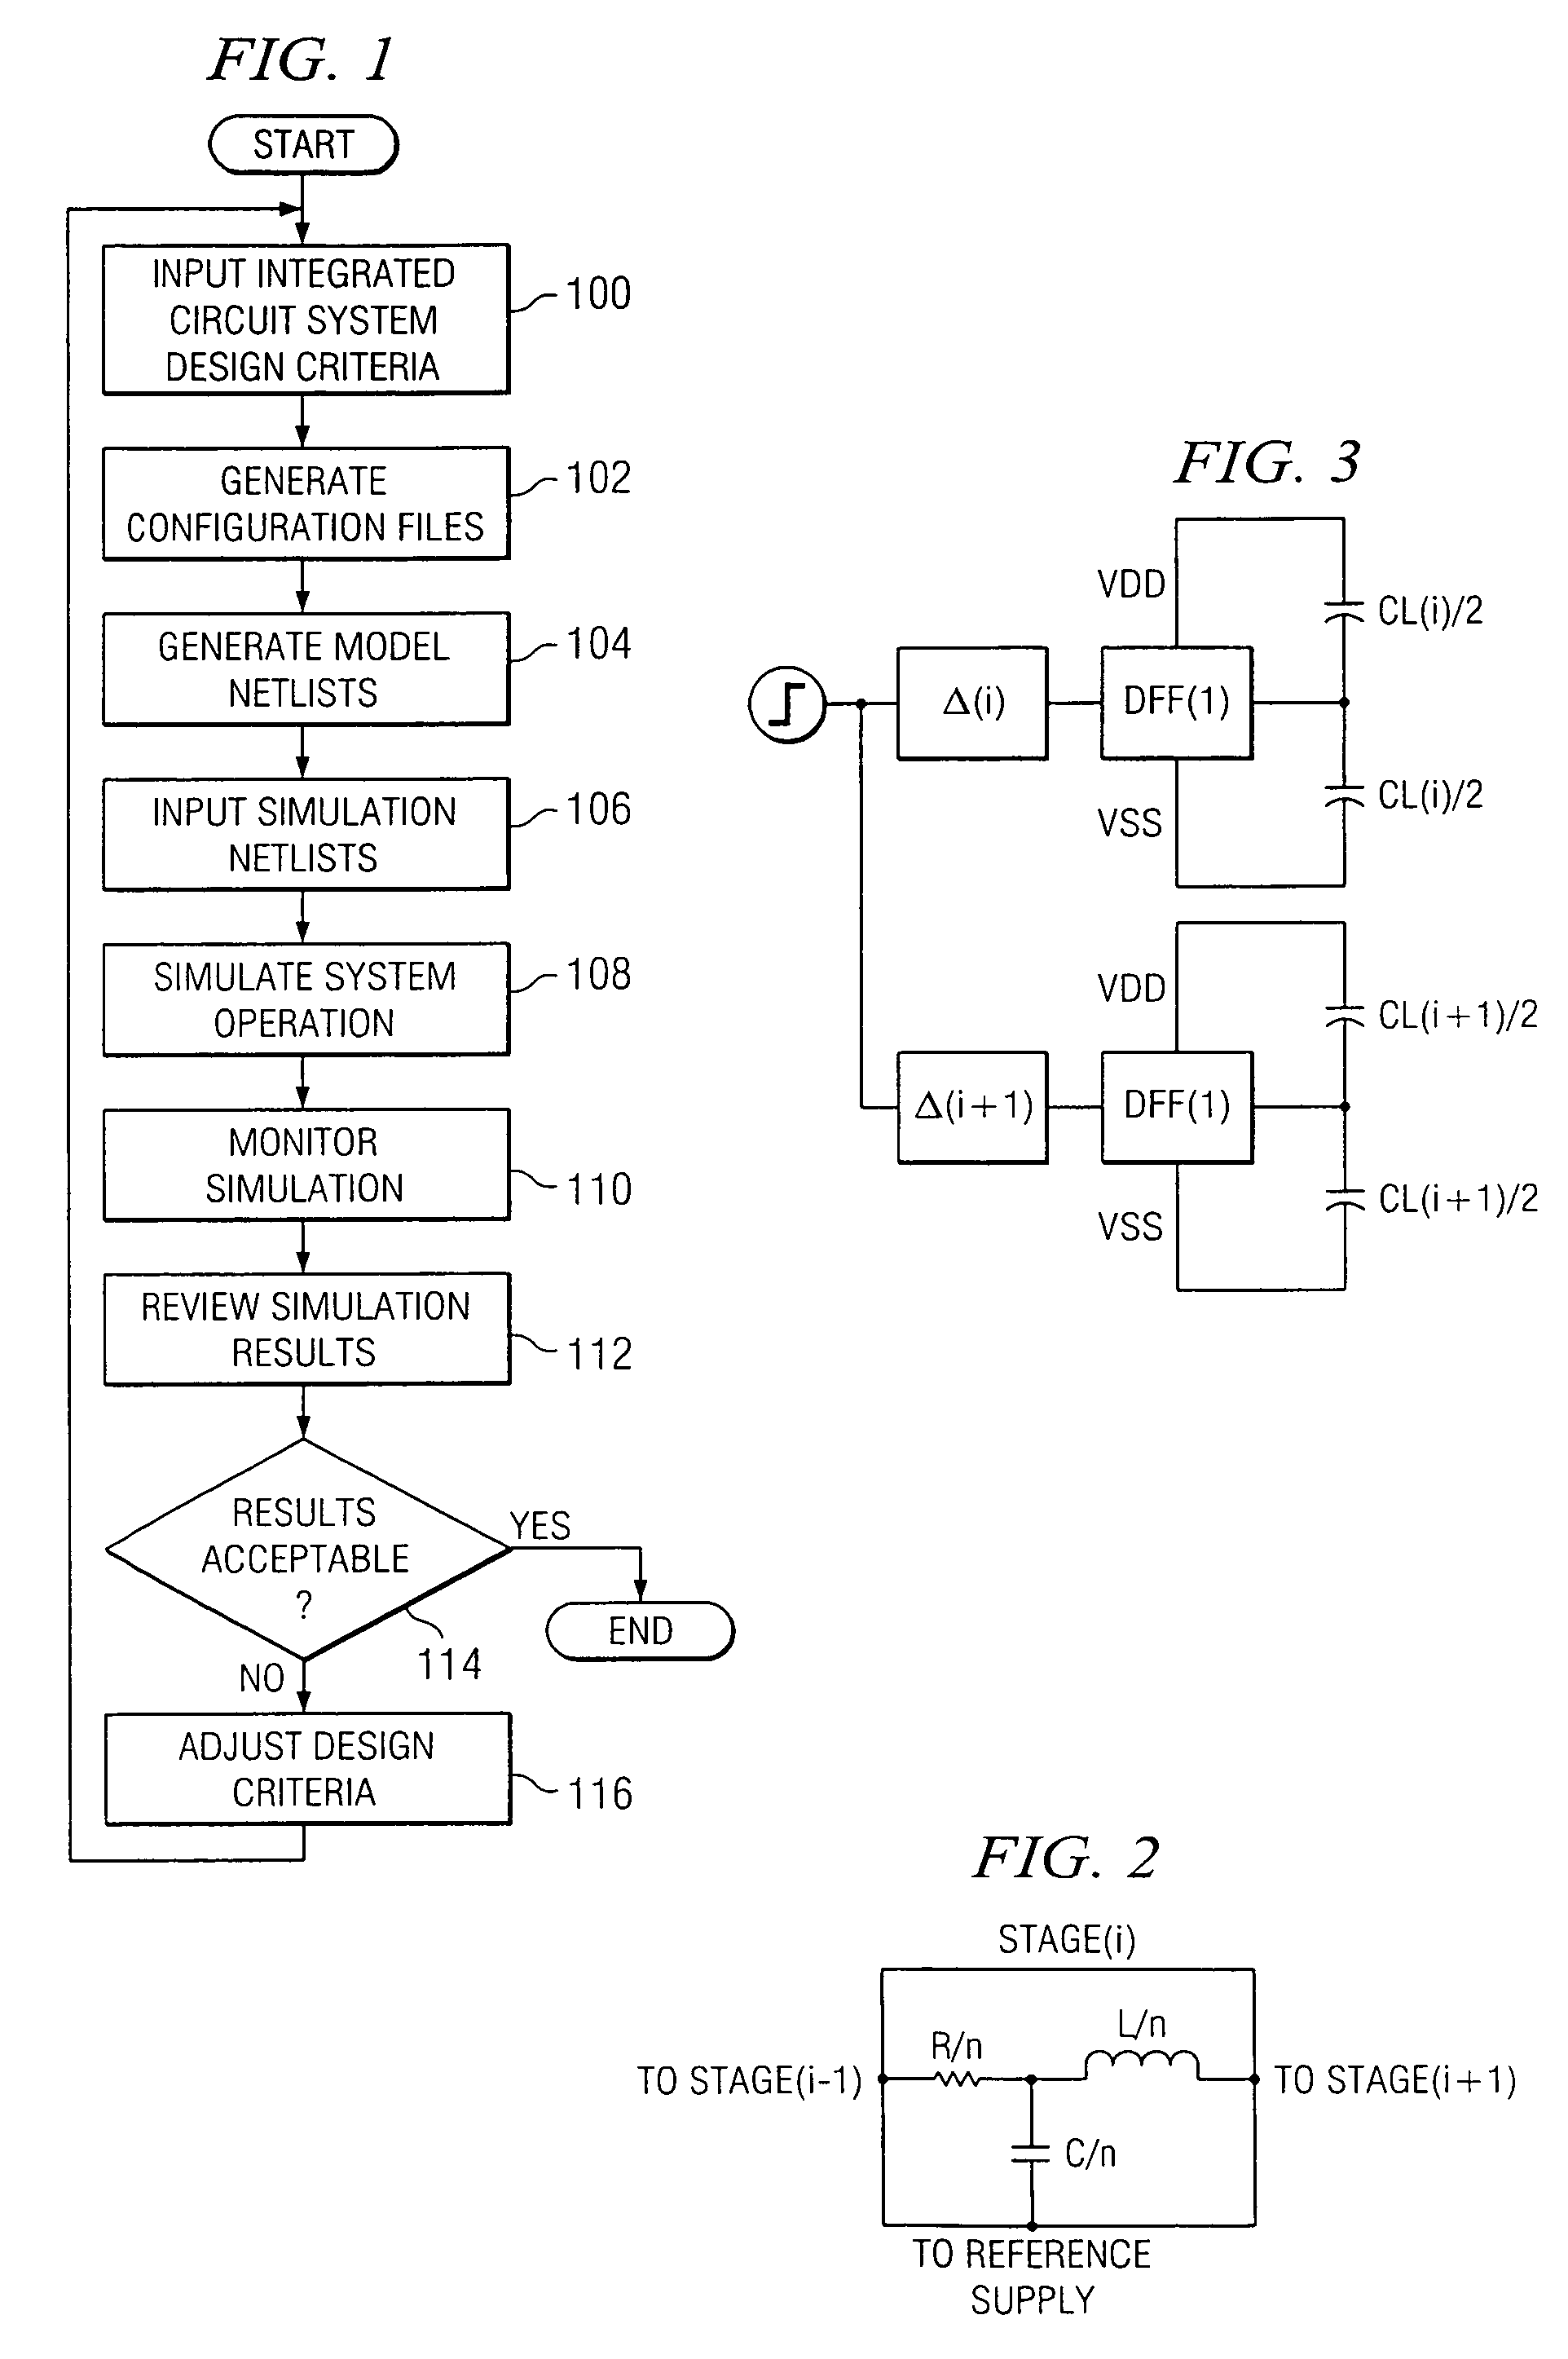 System and method for modeling an integrated circuit system